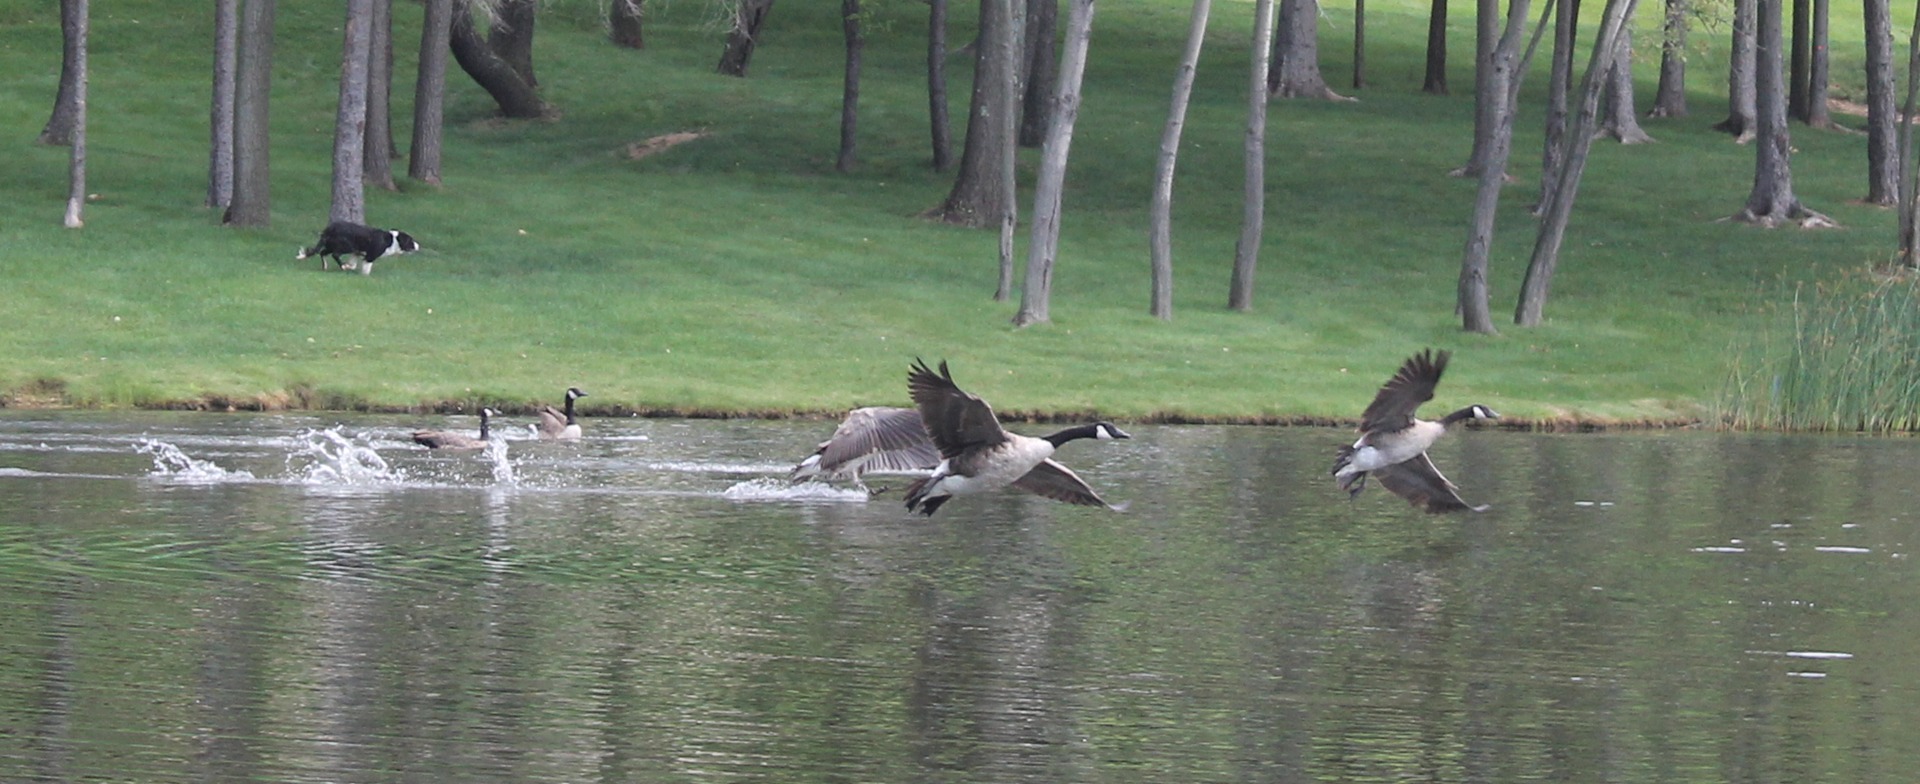 Geese Police of Western Pennsylvania PA boarder collie in action